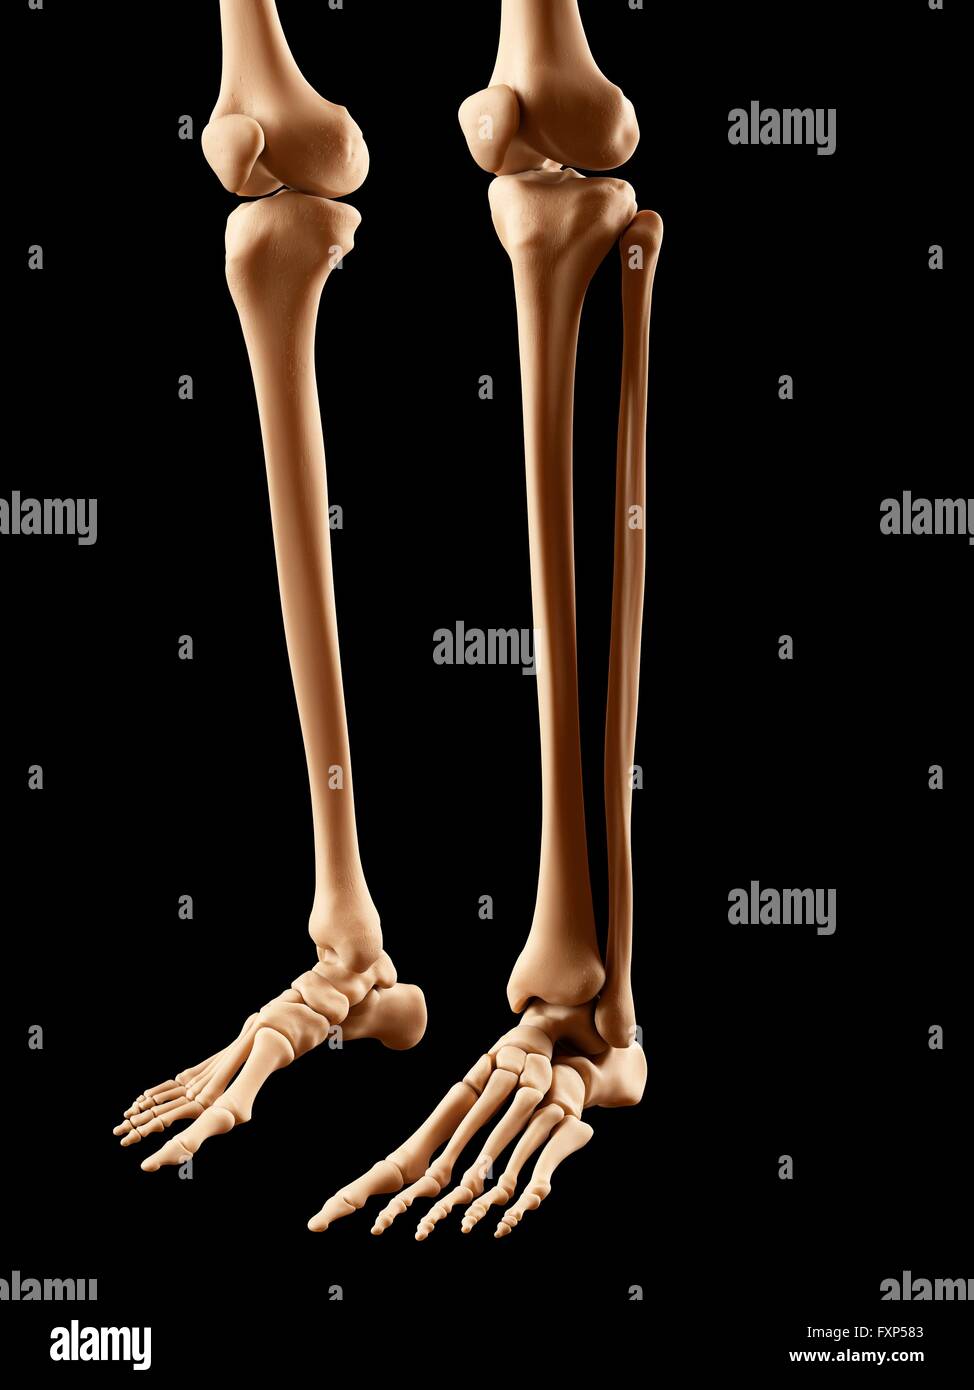 Lower Leg Bones High Resolution Stock Photography and Images - Alamy